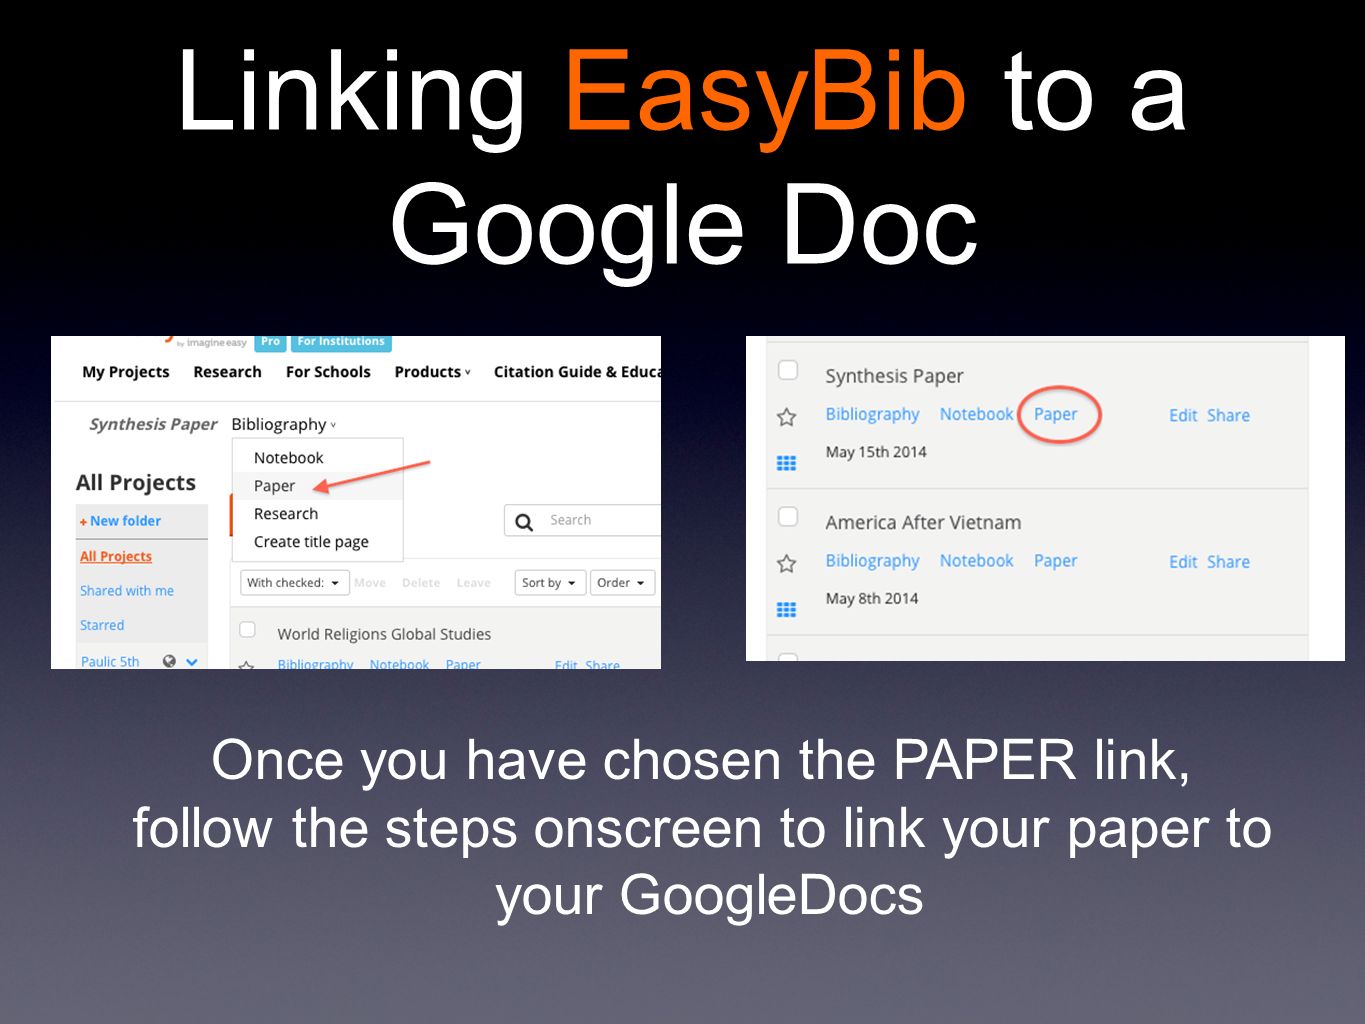 Linking EasyBib to a Google Doc Once you have chosen the PAPER link, follow the steps onscreen to link your paper to your GoogleDocs